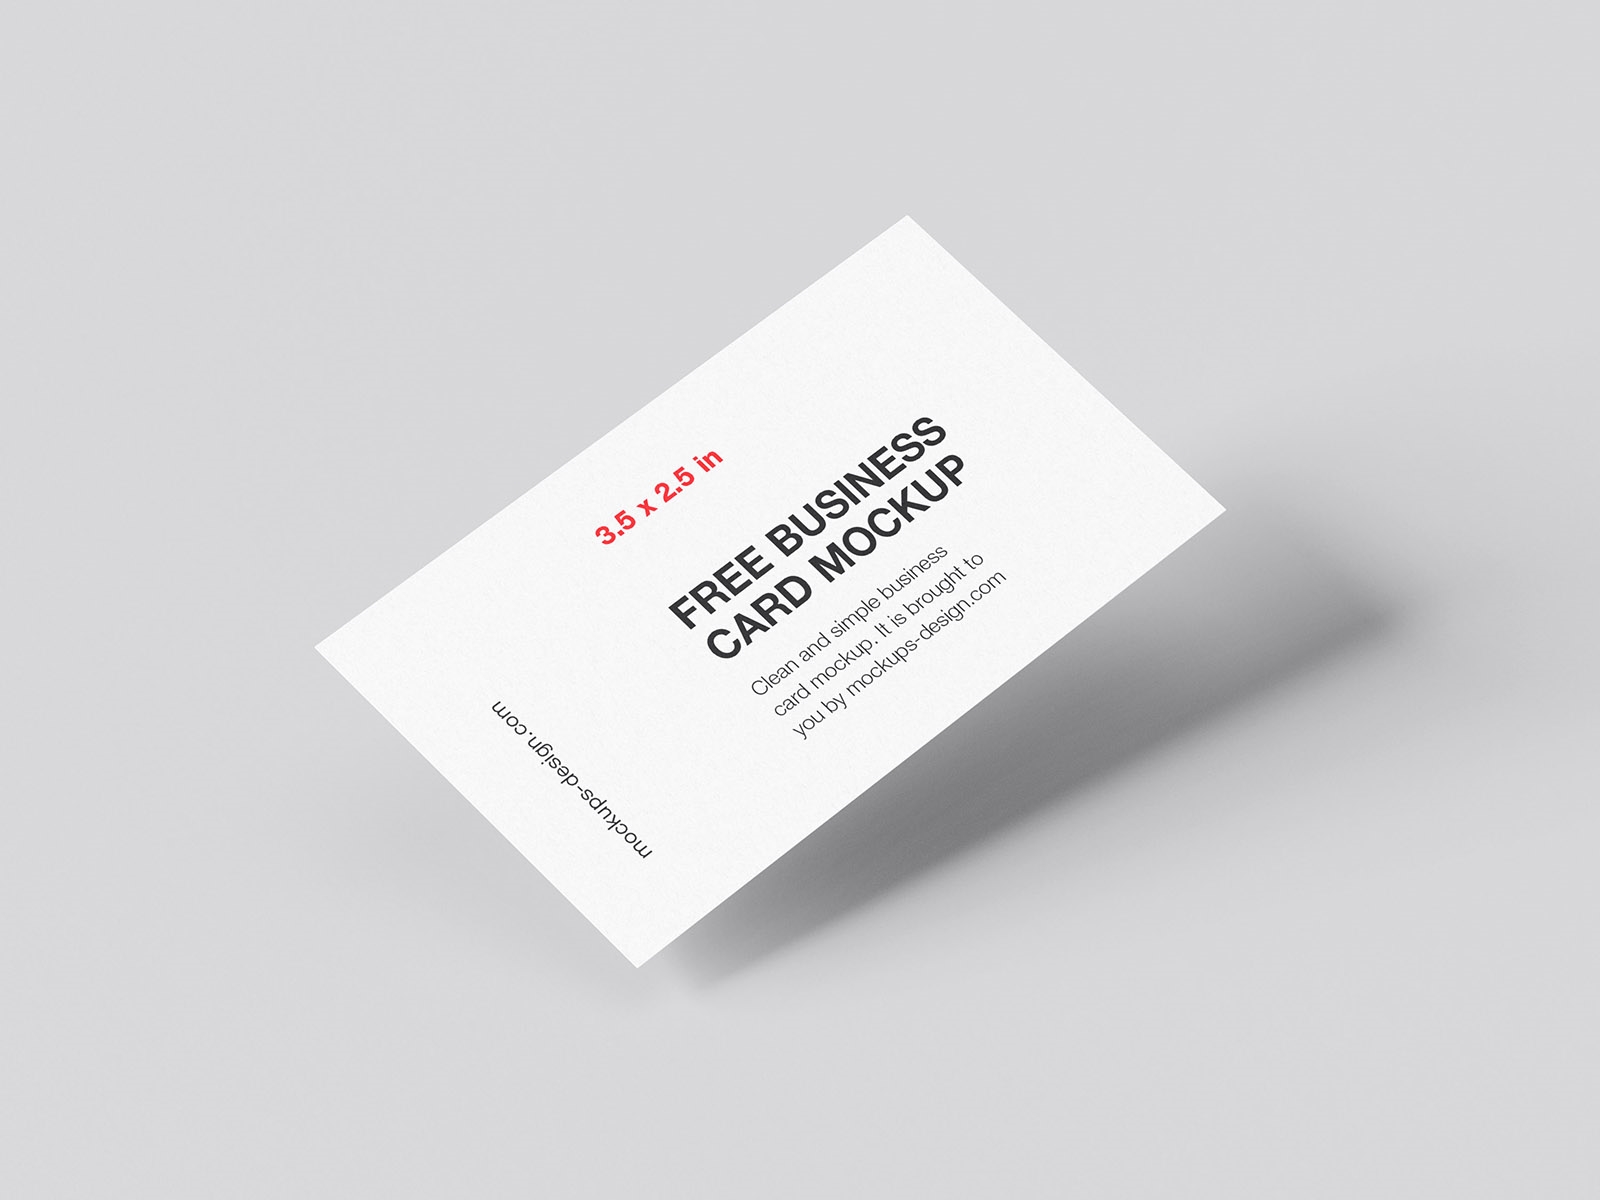 5 Mockups of Business Cards from Various Views FREE PSD